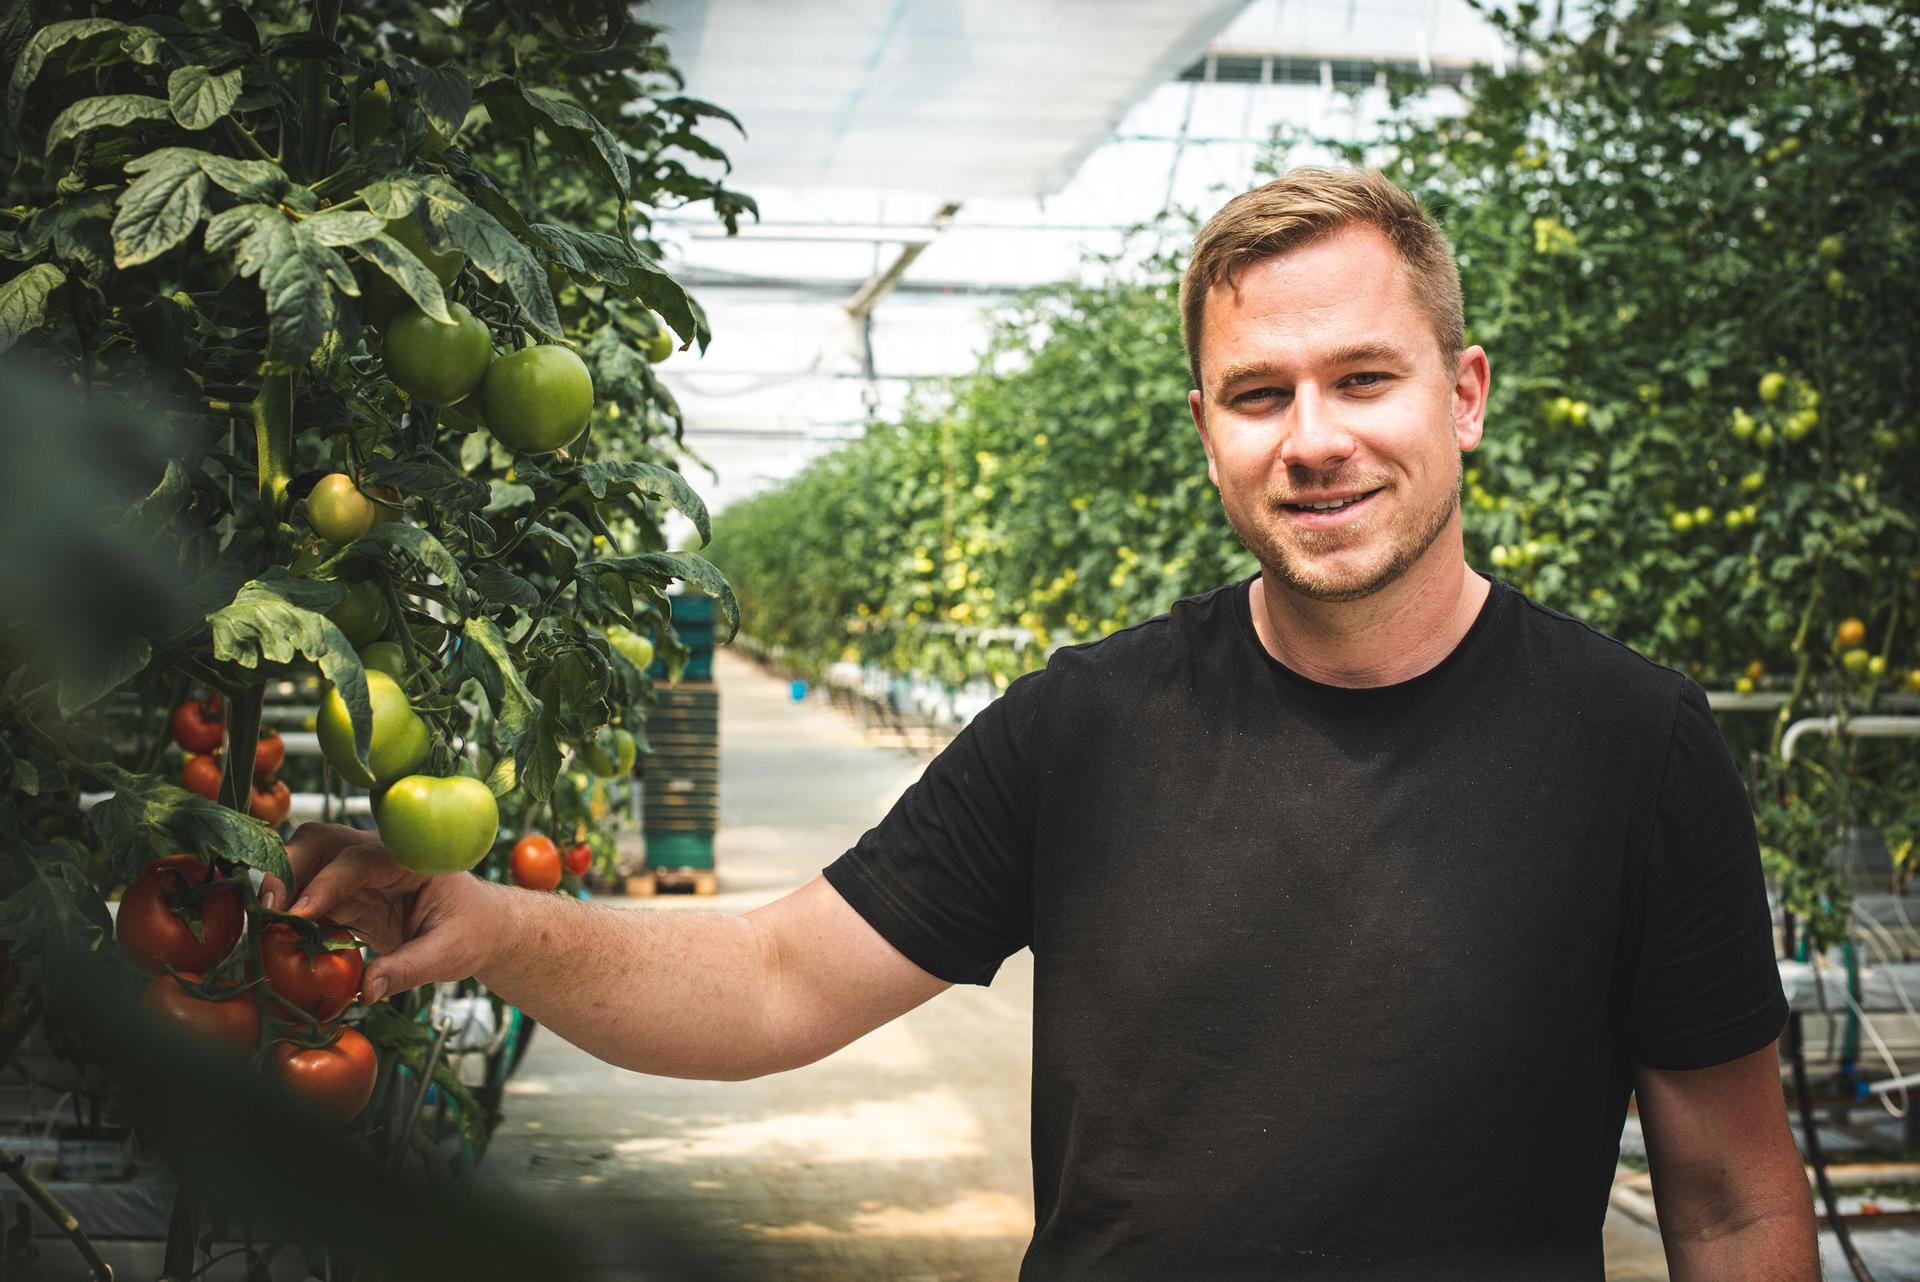 Matěj Sklenář, 28, the head agronomist at Ráječek Farm in the south of the Czech Republic, stands in one of the farm's hydroponic greenhouses.